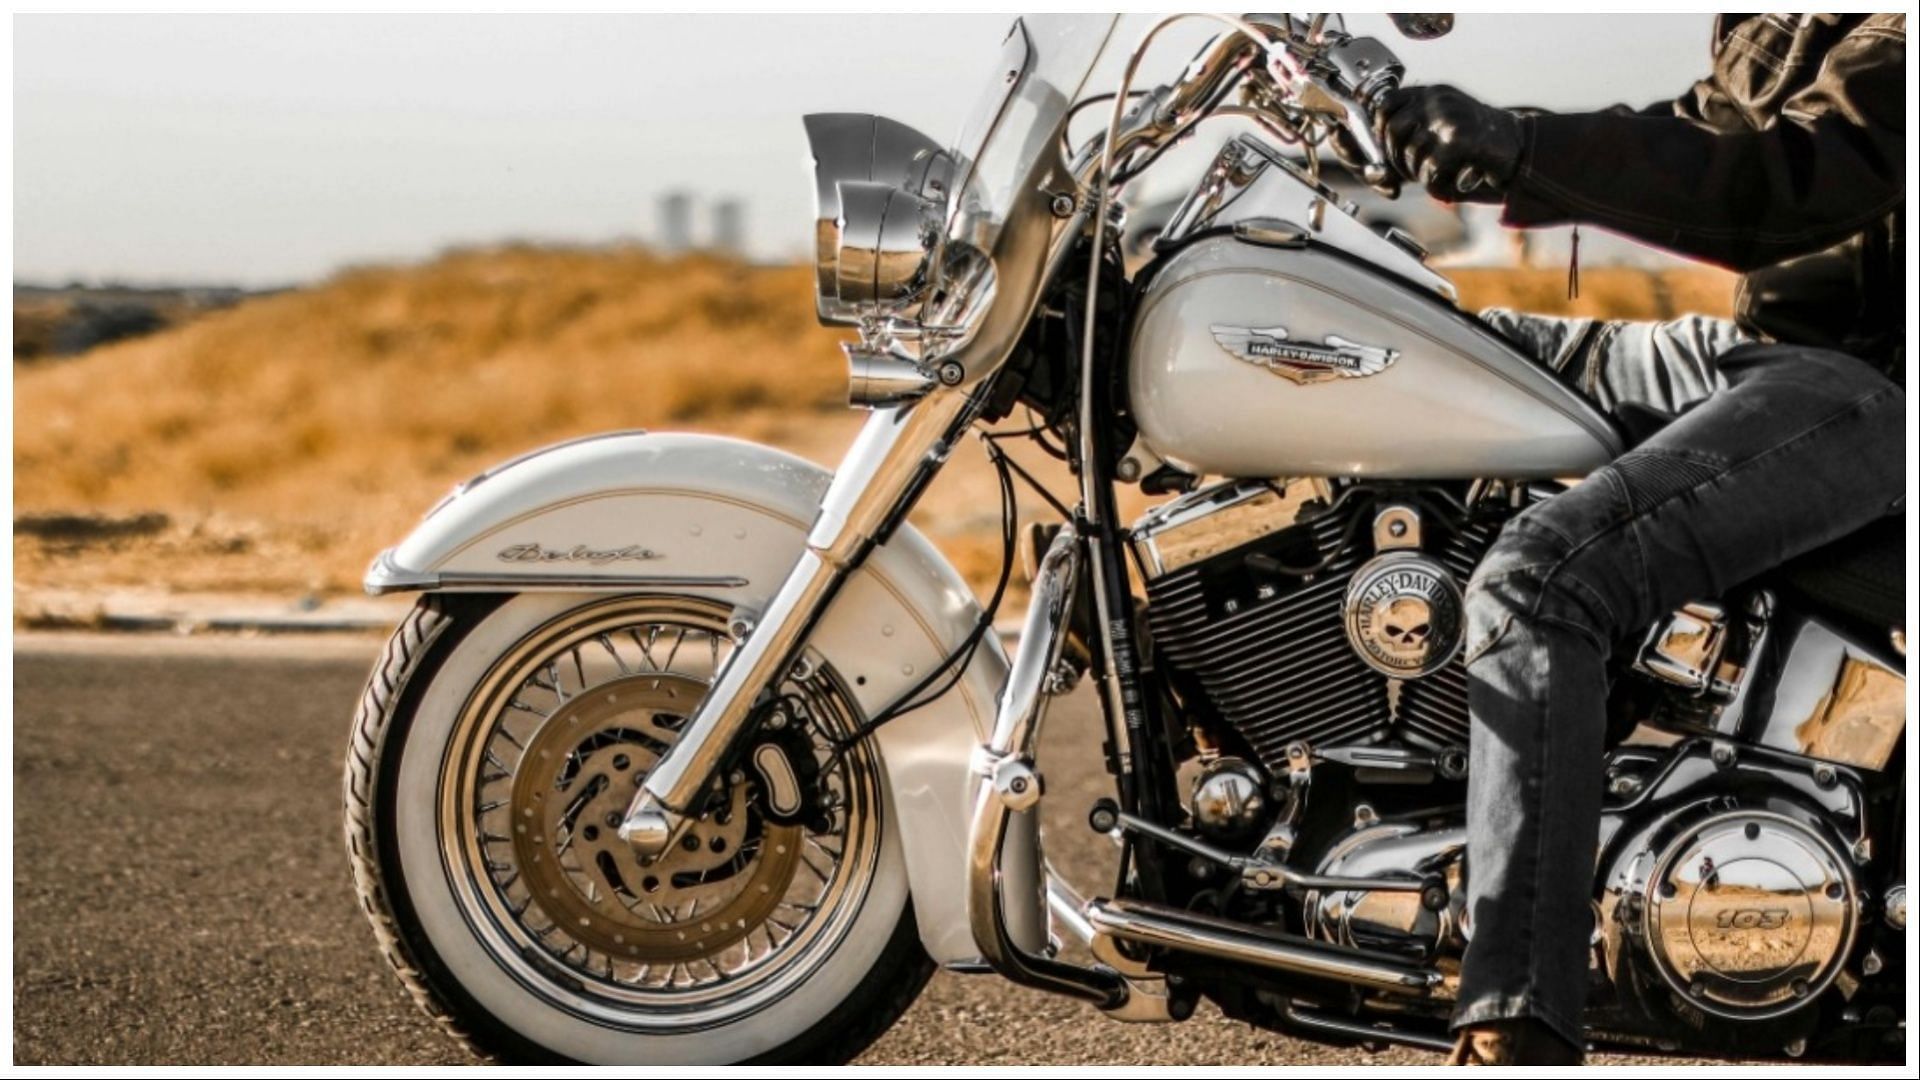 A Harley Davidson motorcycle rider died after colliding into a tree, (Image via Pexels) 